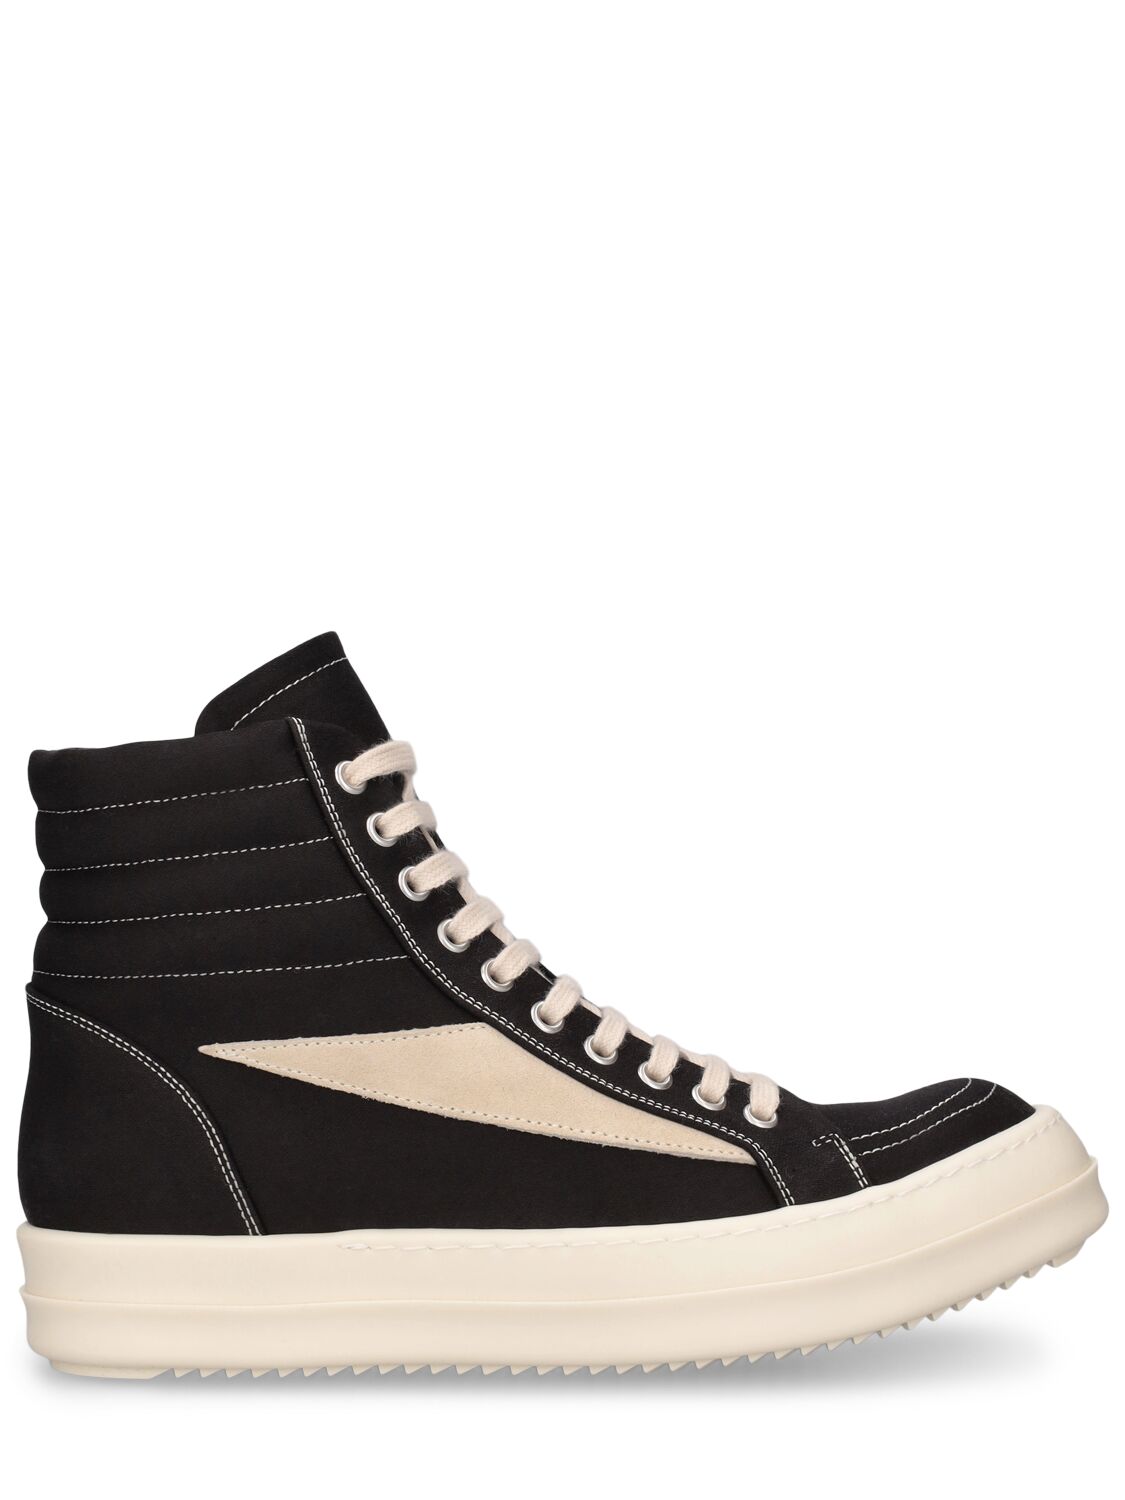 Image of Vintage Canvas High Sneakers